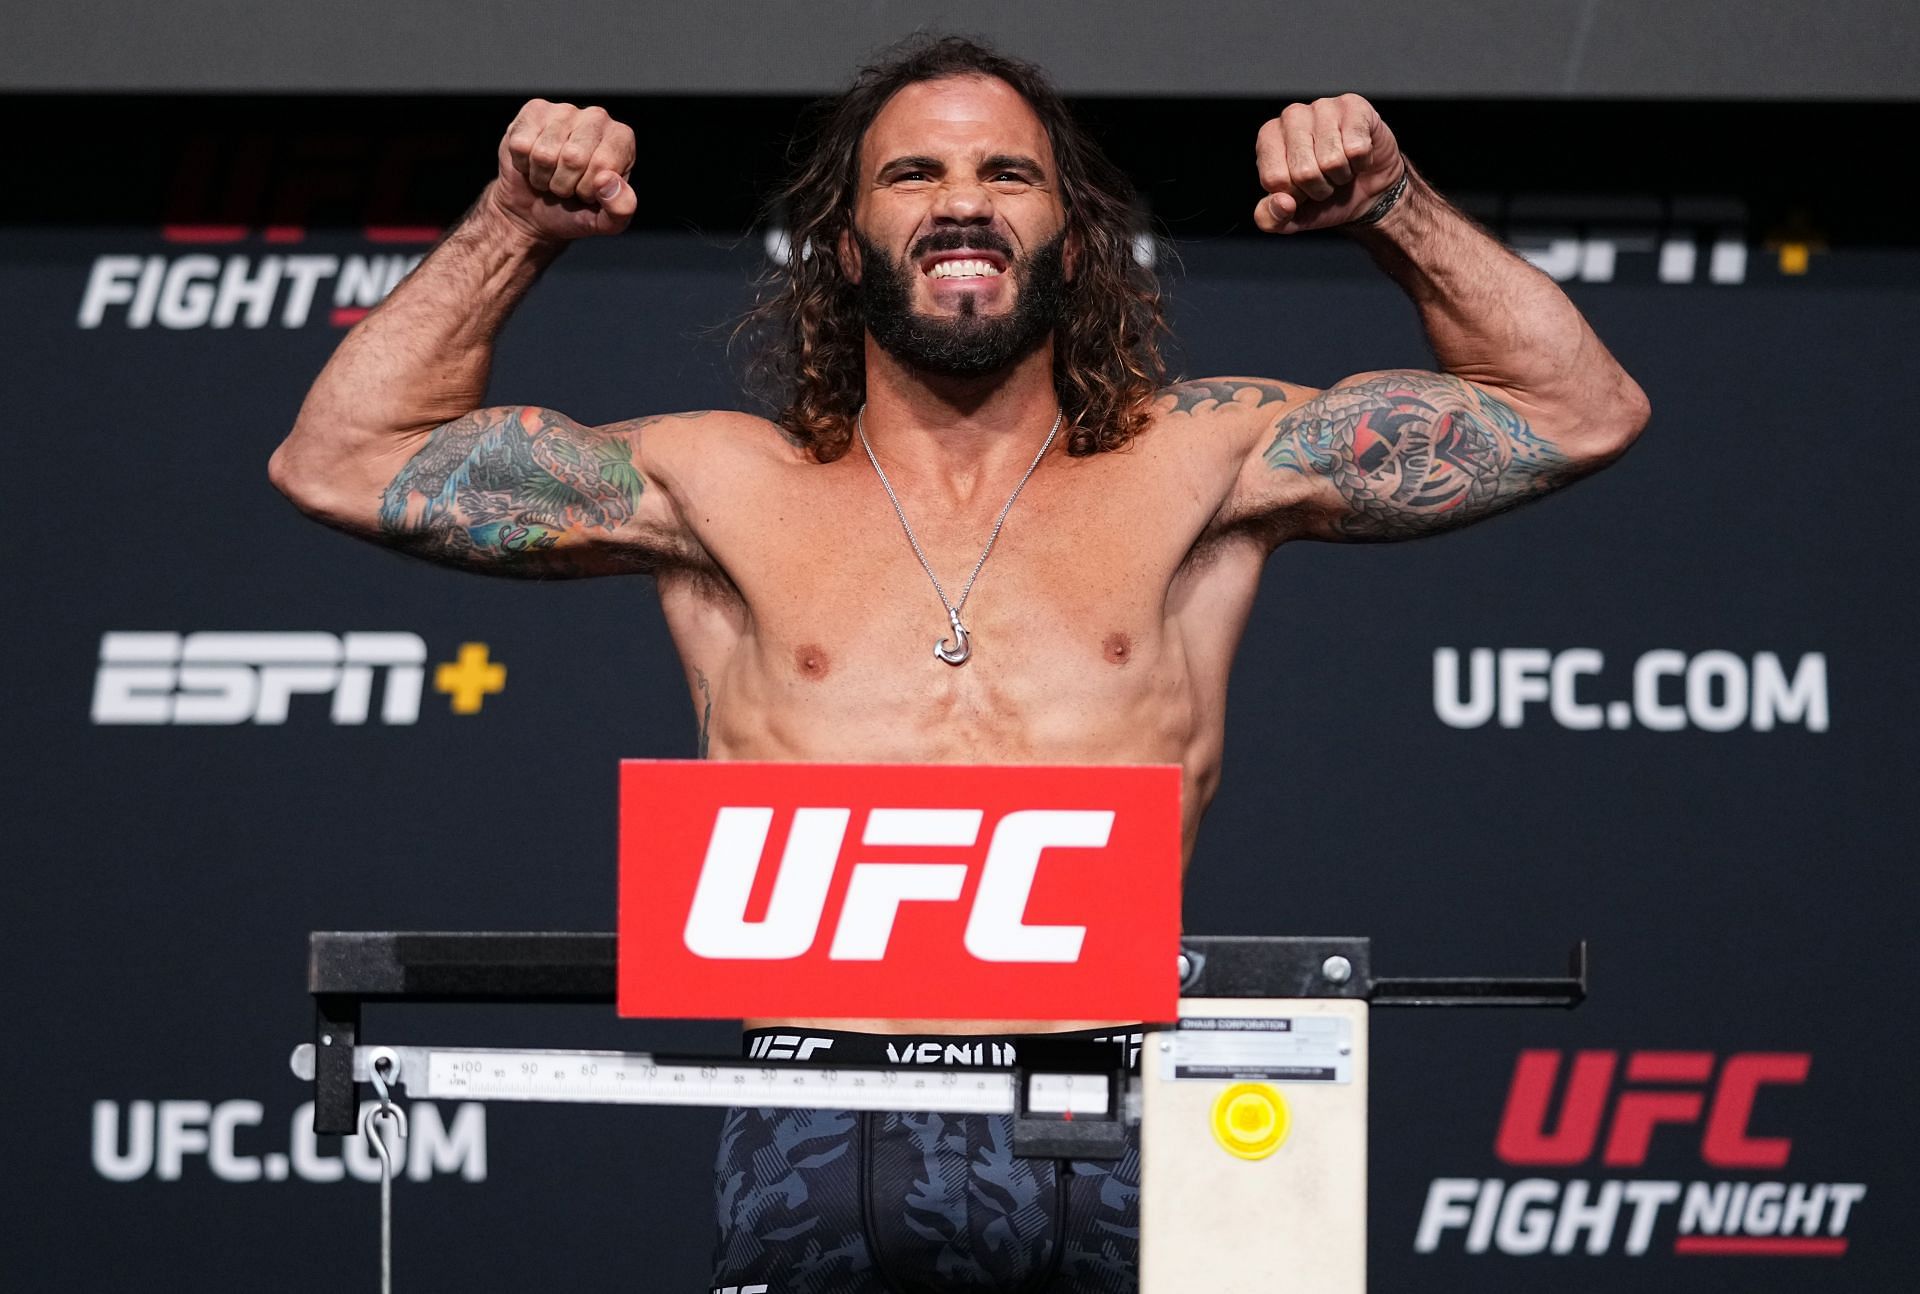 Clay Guida has a record of 37-21